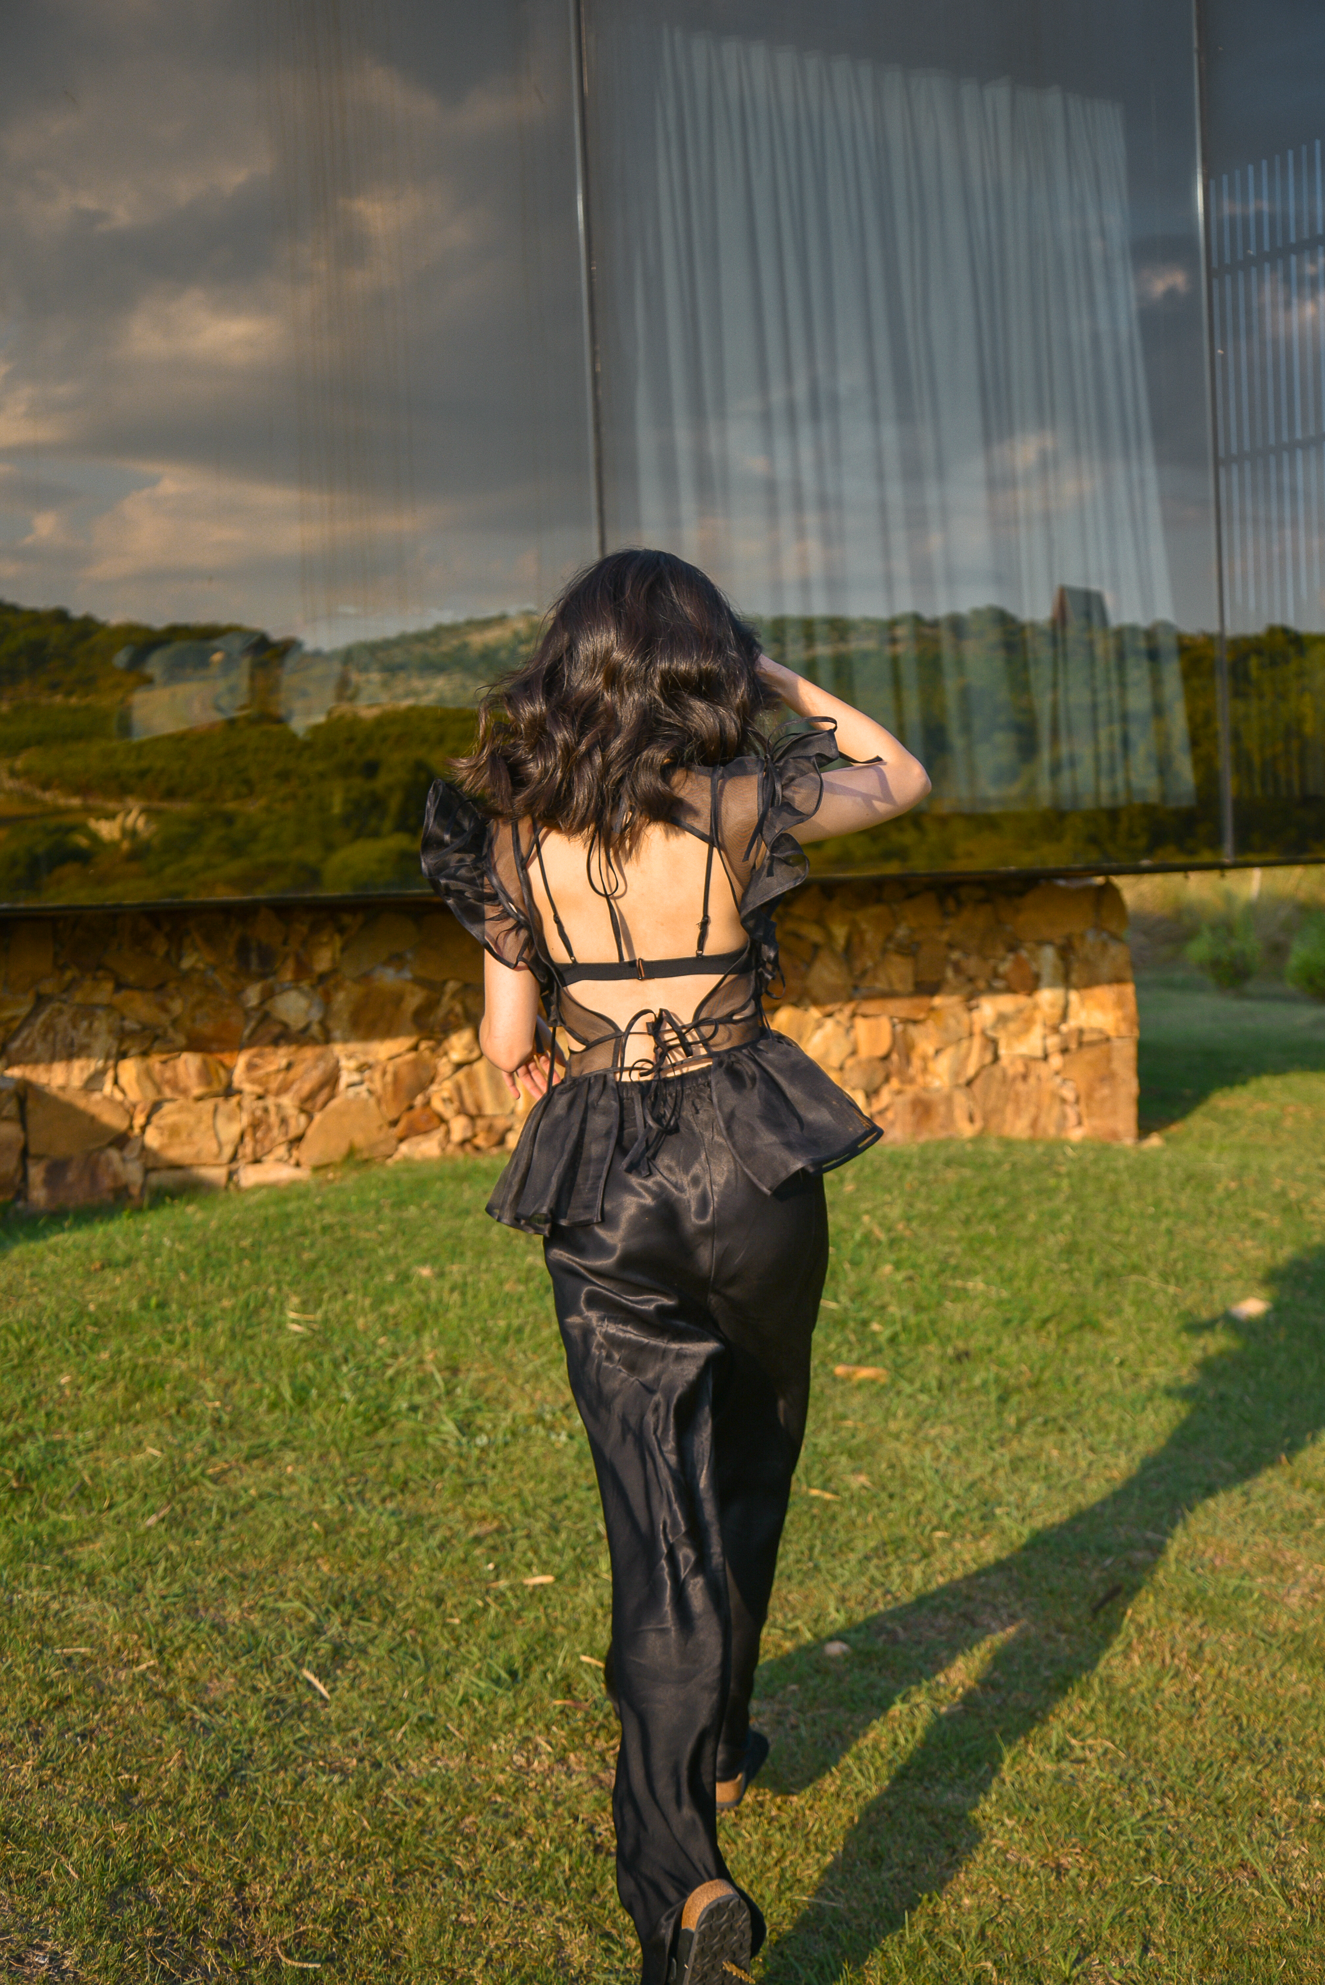 Black outfit at Sacromonte Landscape Hotel, unique hotels around the world, Uruguay destinations, architecture and wine lovers - FOREVERVANNY